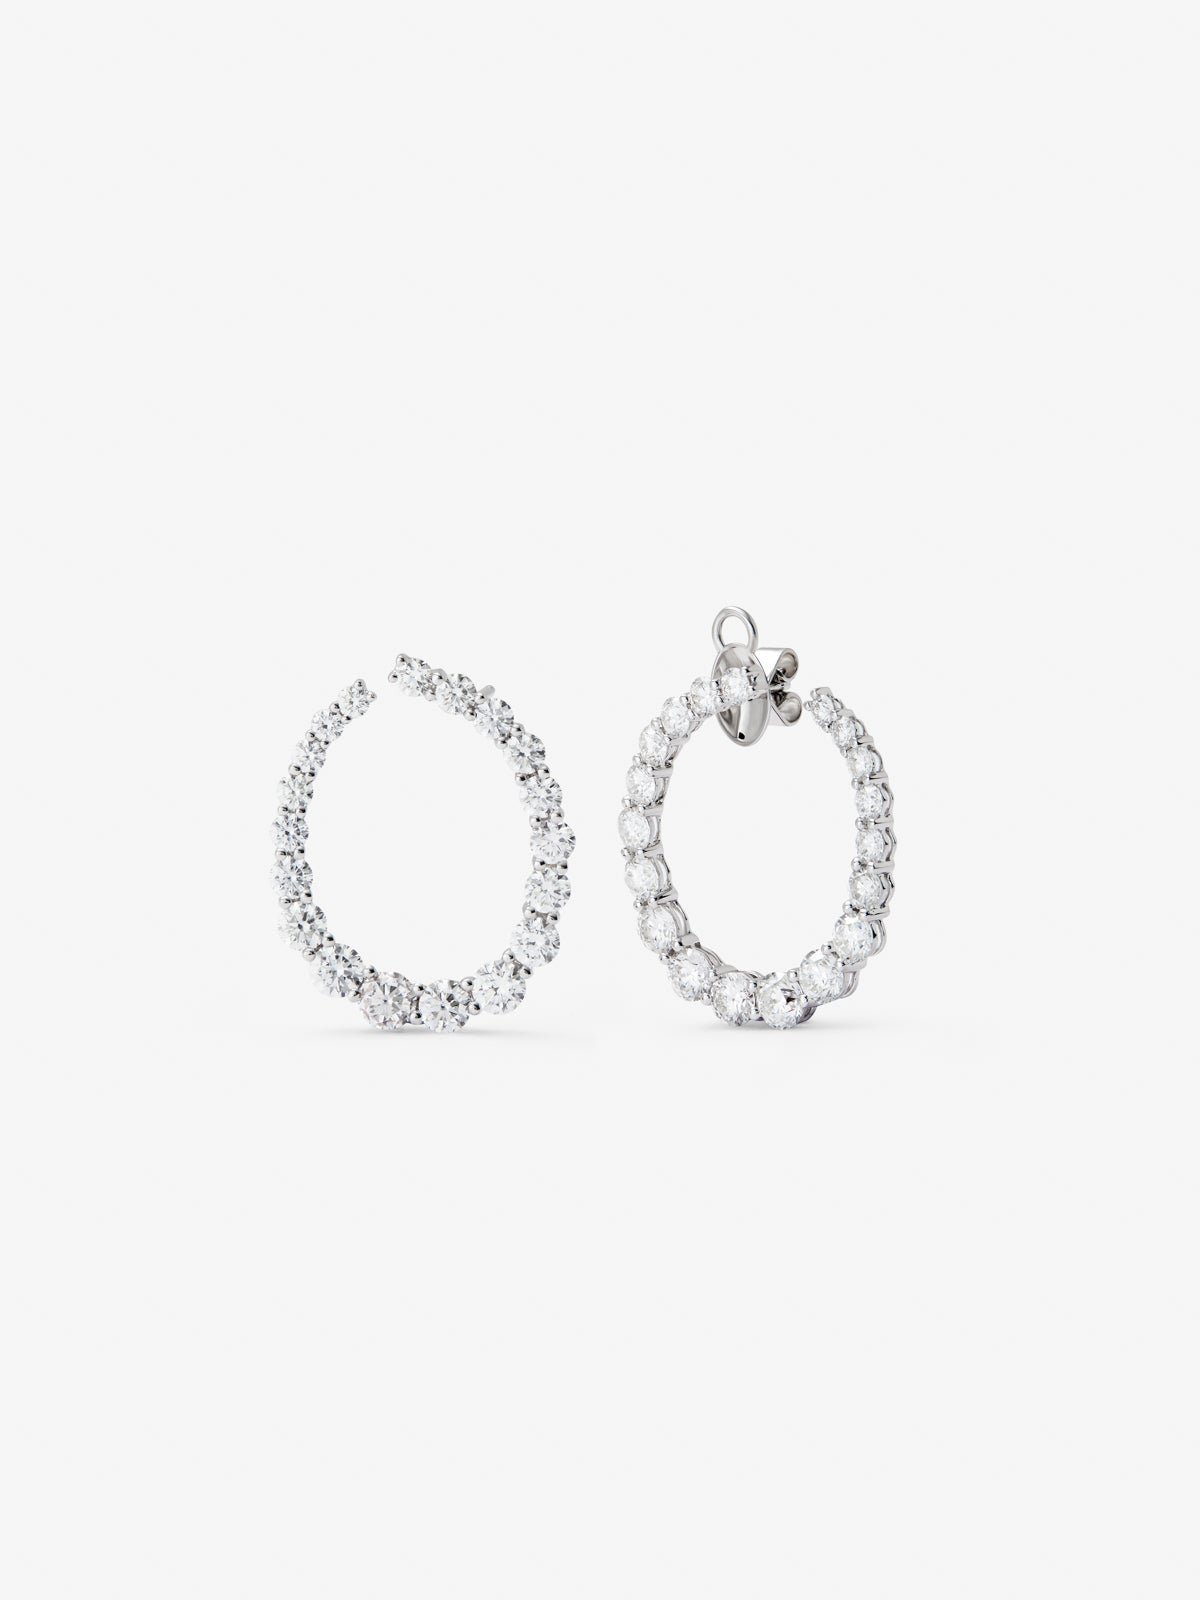 18K white gold earrings with white diamonds in 3.06 cts bright size